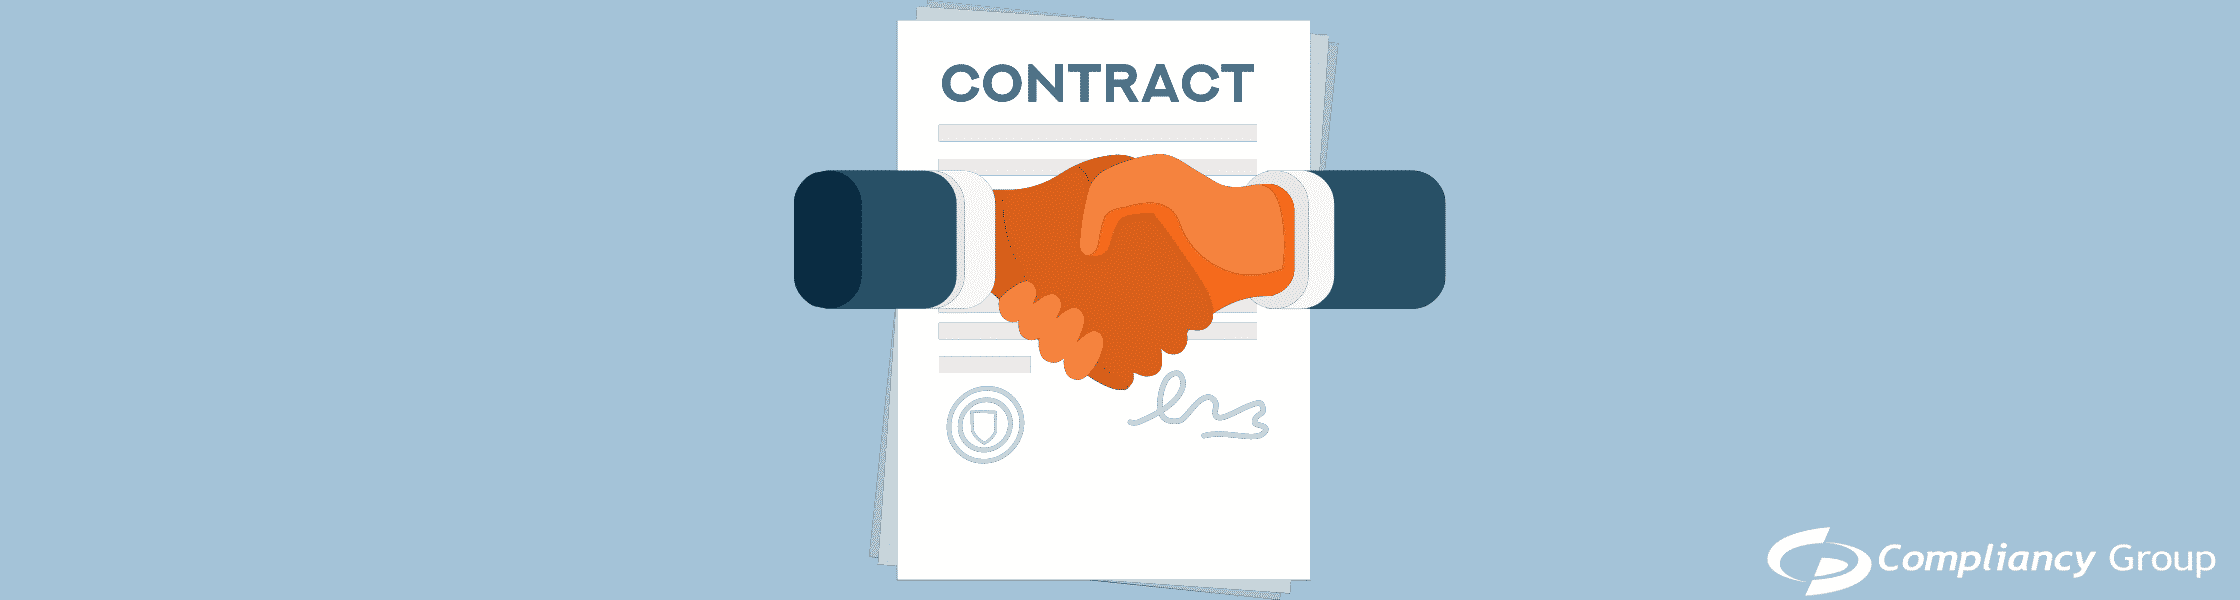 MSP contracts